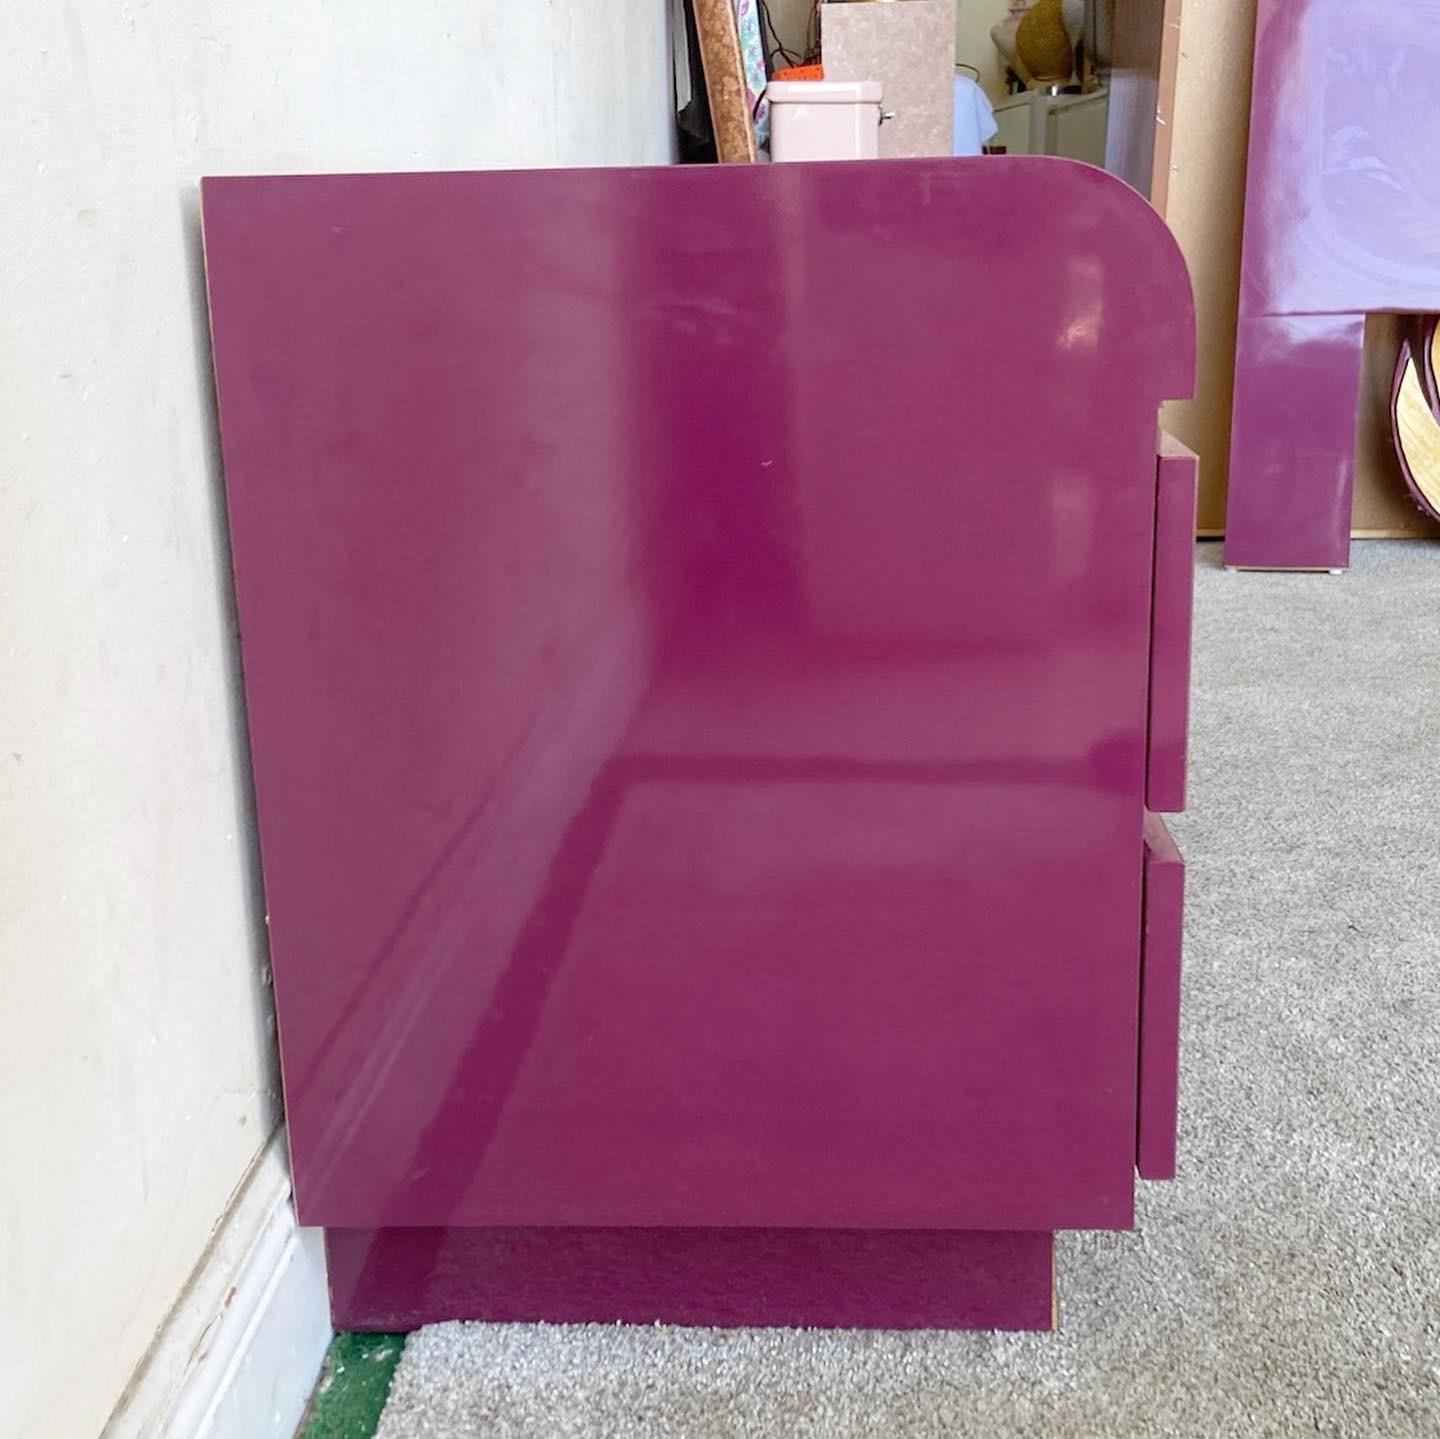 Late 20th Century 1980s Postmodern Purple Lacquer Laminate Nightstands, a Pair